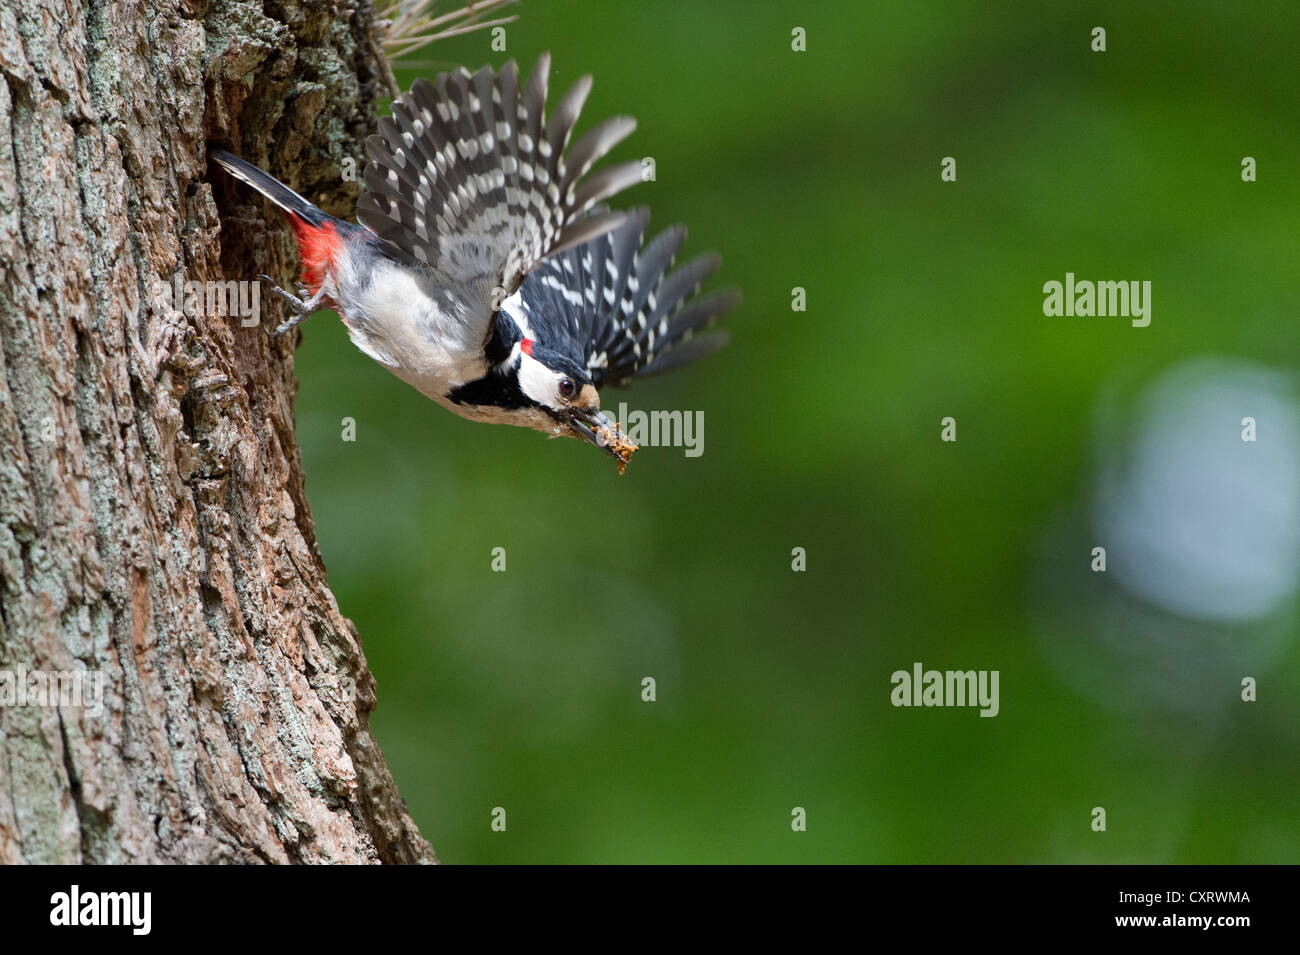 Great Spotted Woodpecker (Dendrocopos major), in flight, Urwald Sababurg Nature Reserve, North Hesse, Germany, Europe Stock Photo